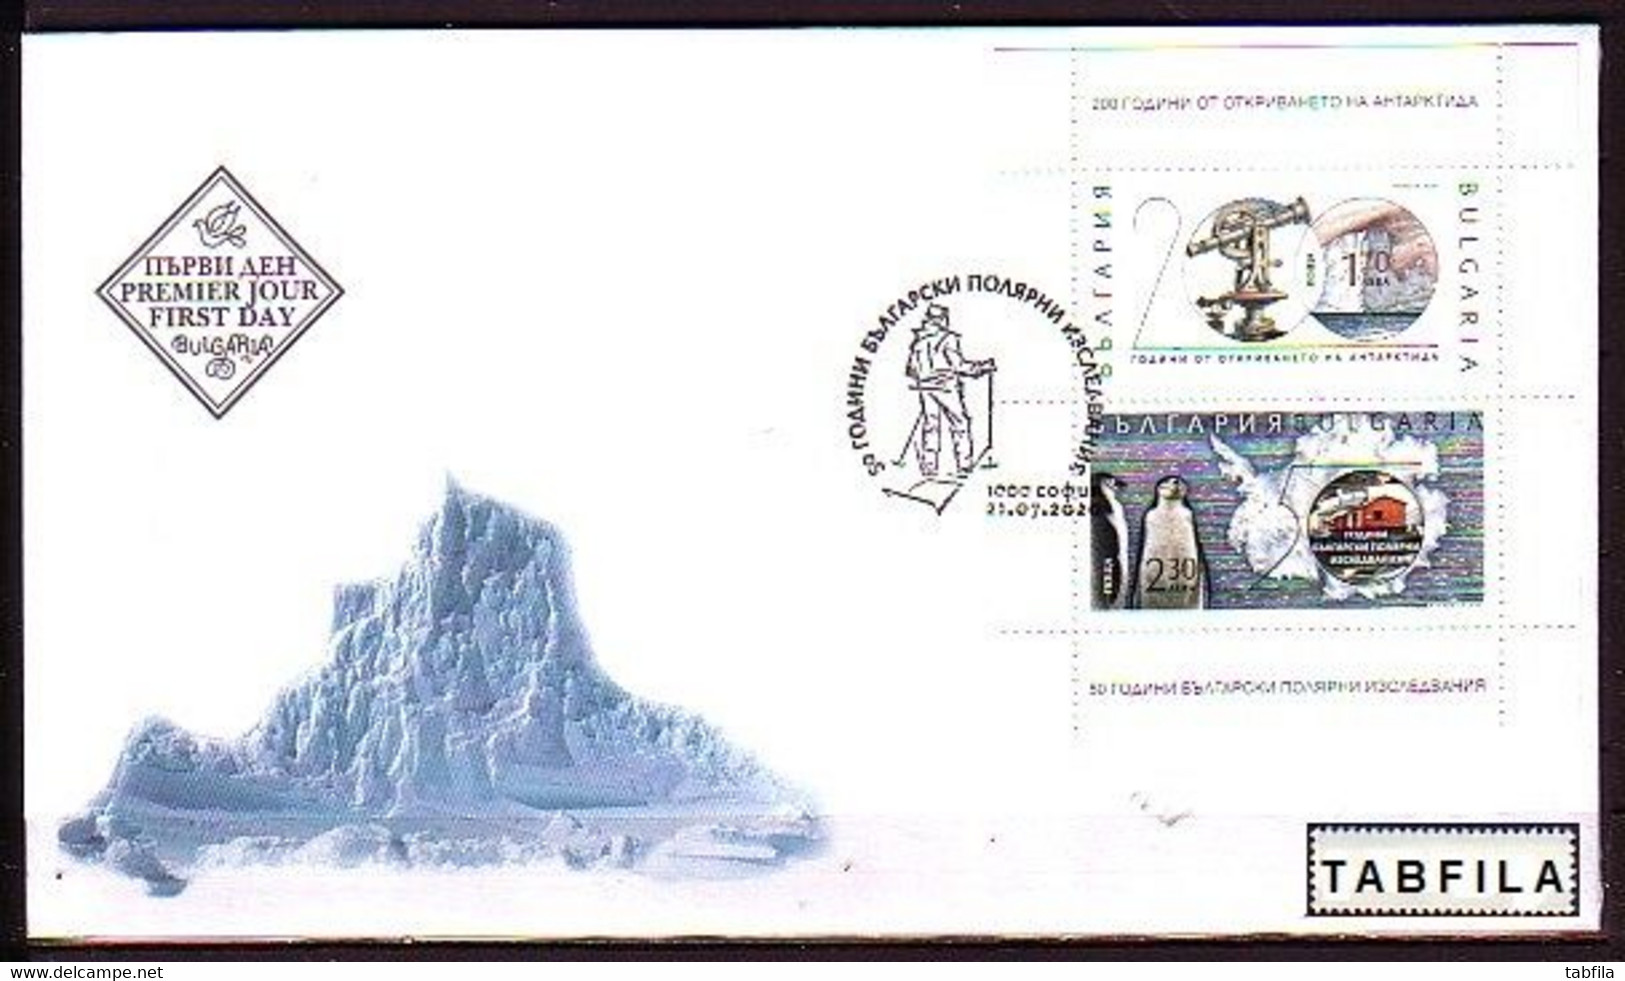 BULGARIA - 2020 -  Polar Researches. 200 Years Since Discovery Of ANTARCTICA - FDC - Neufs